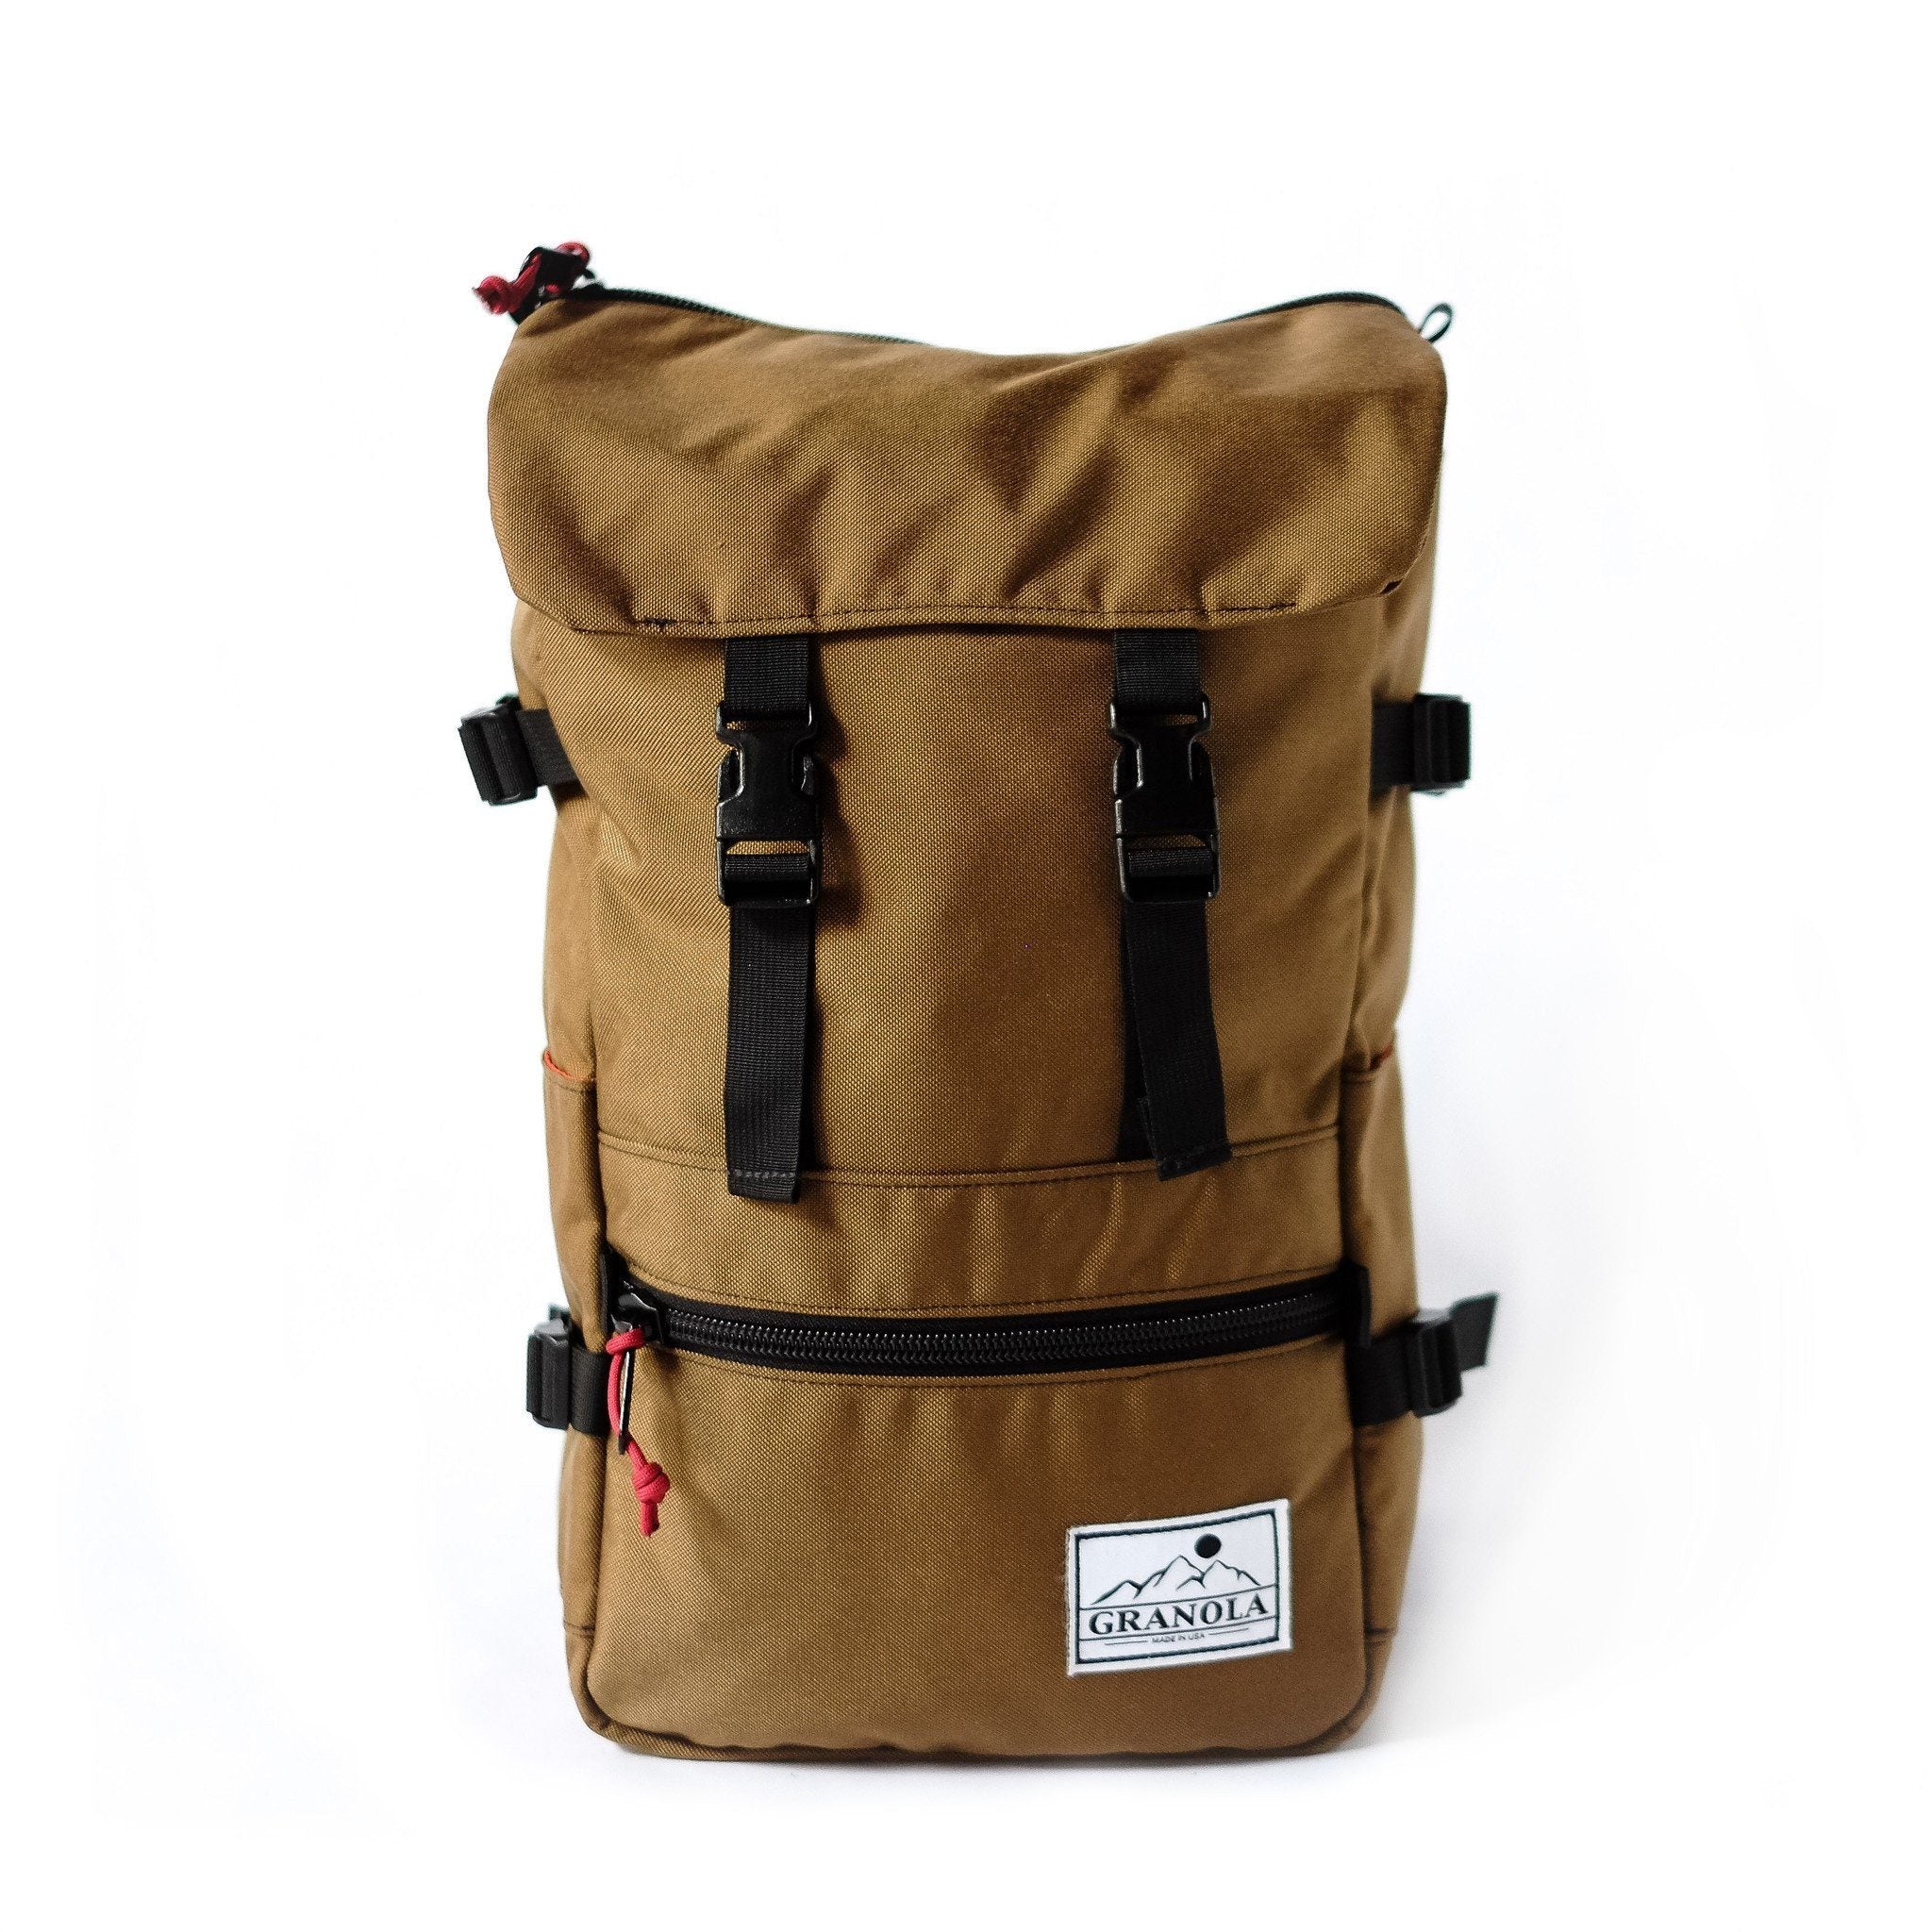 Travelers Pack - granolaproducts.com